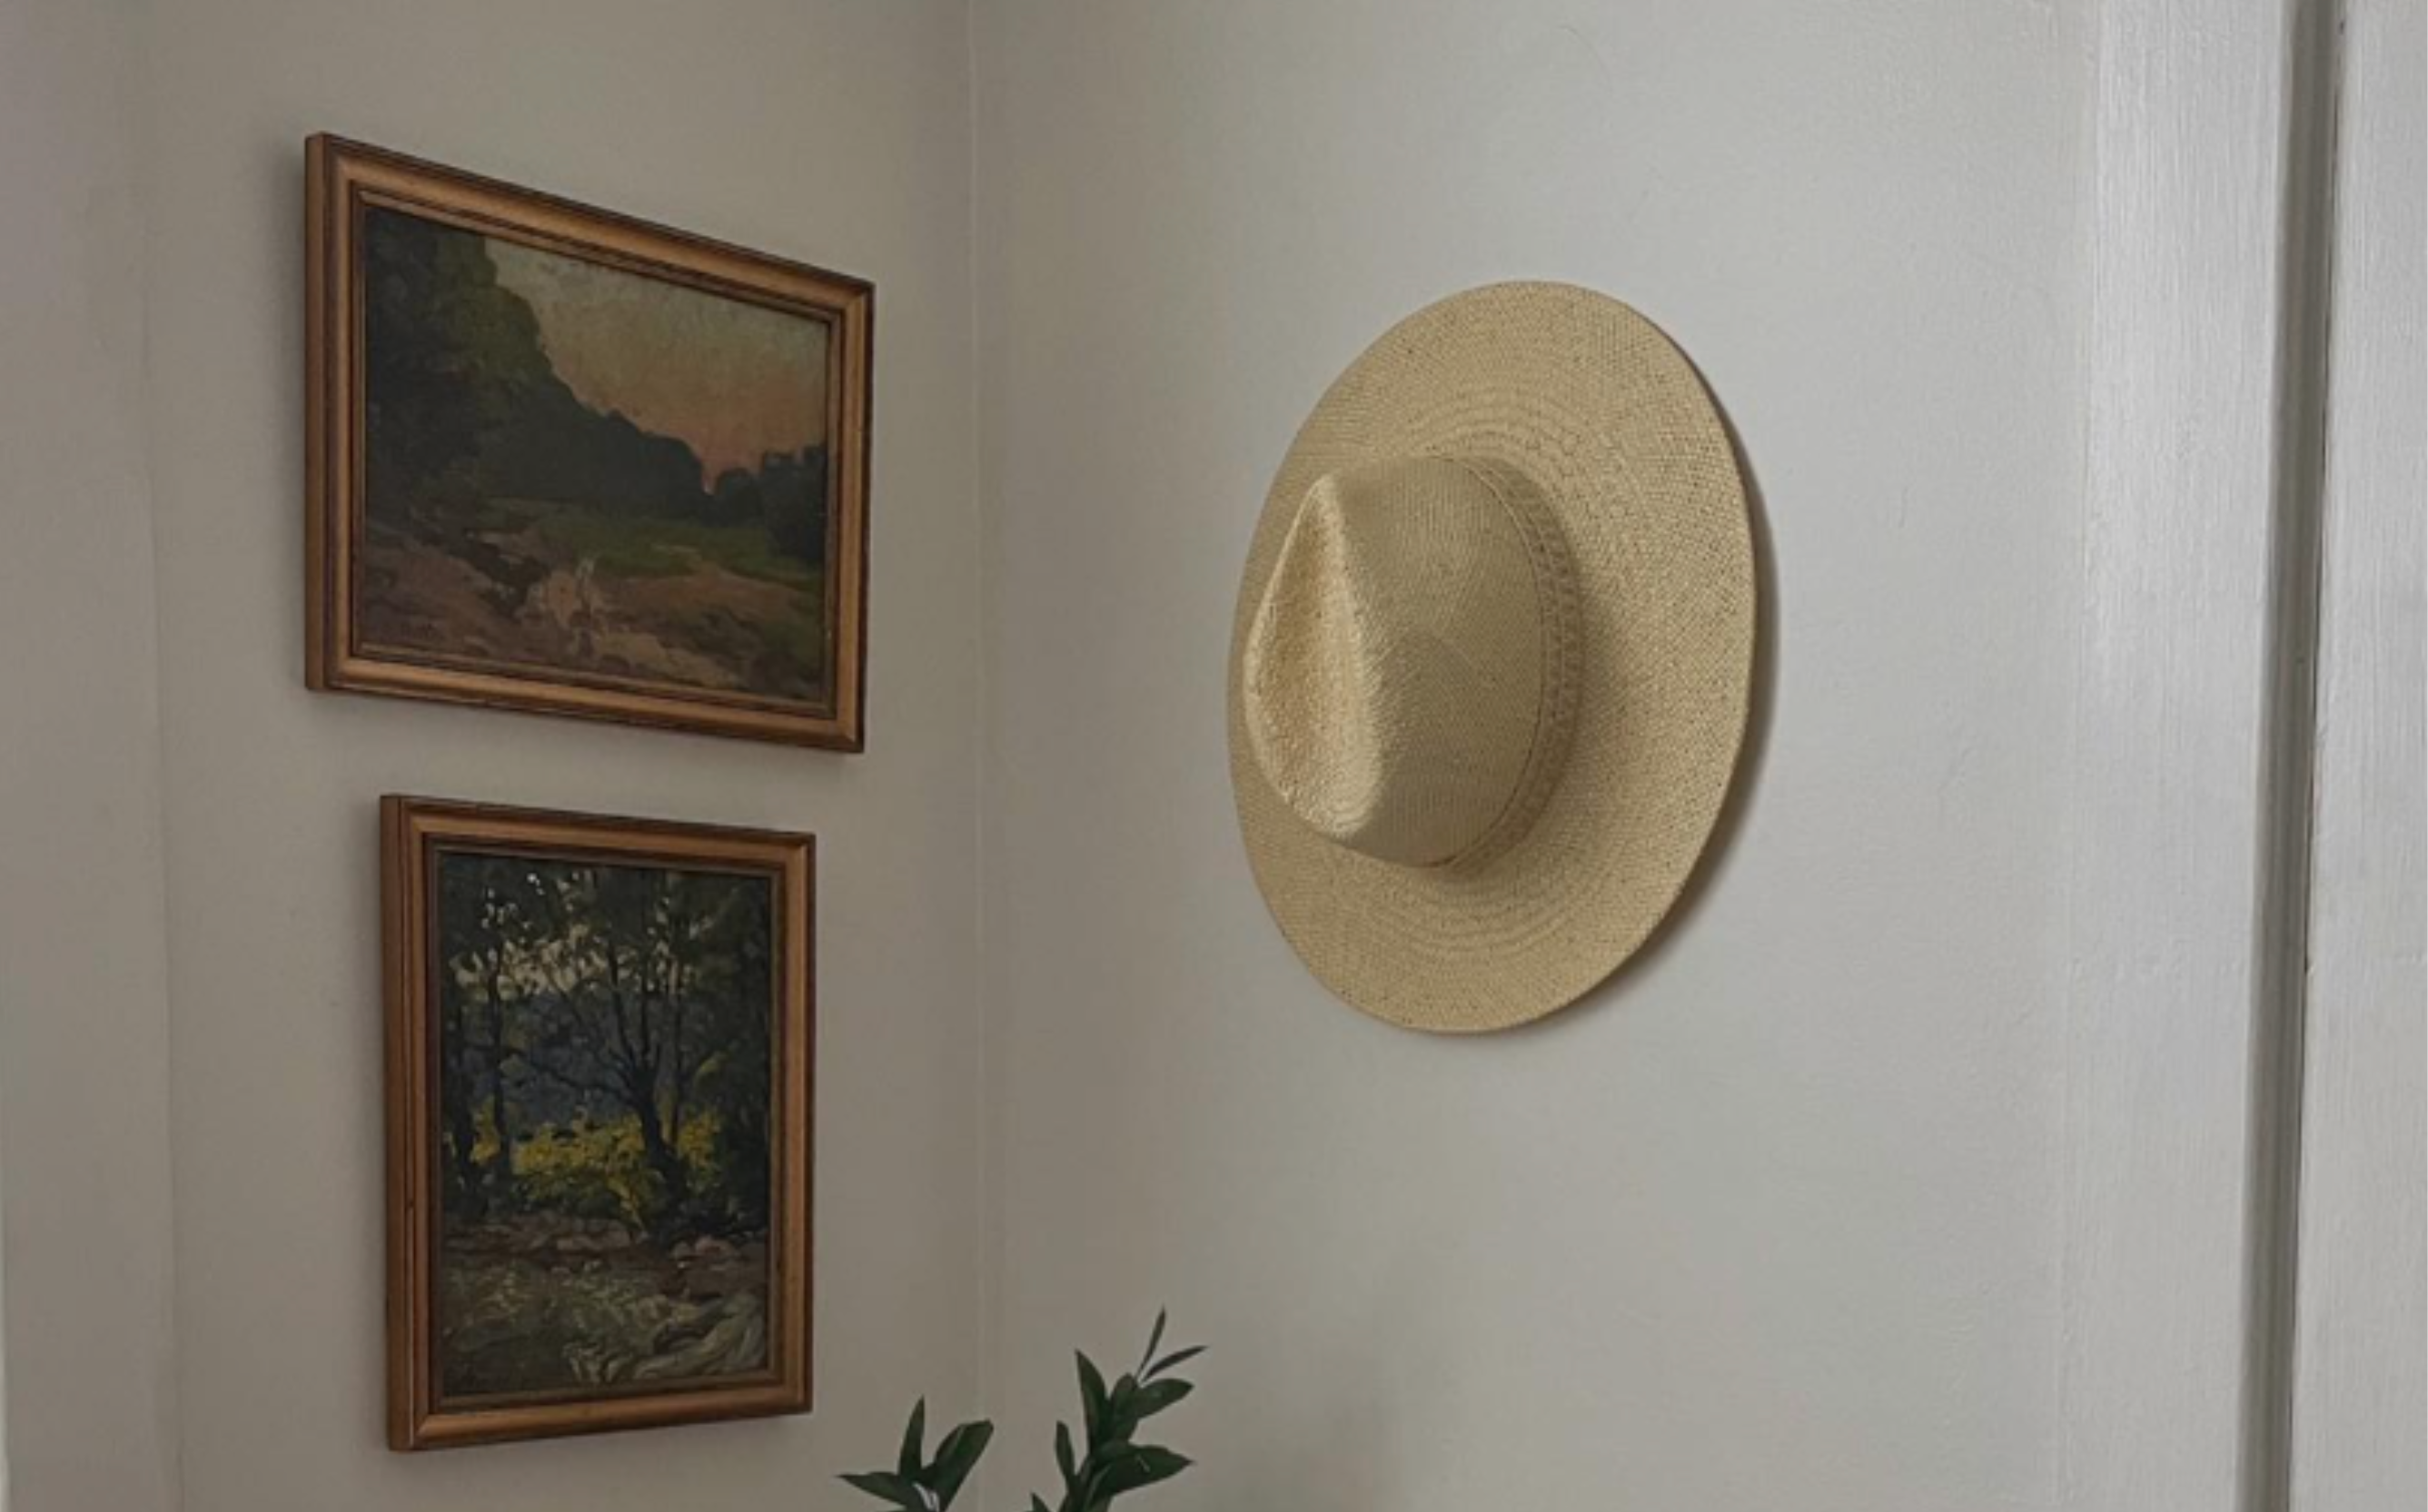 Two paintings on a wall, a plant, and a hanging hat